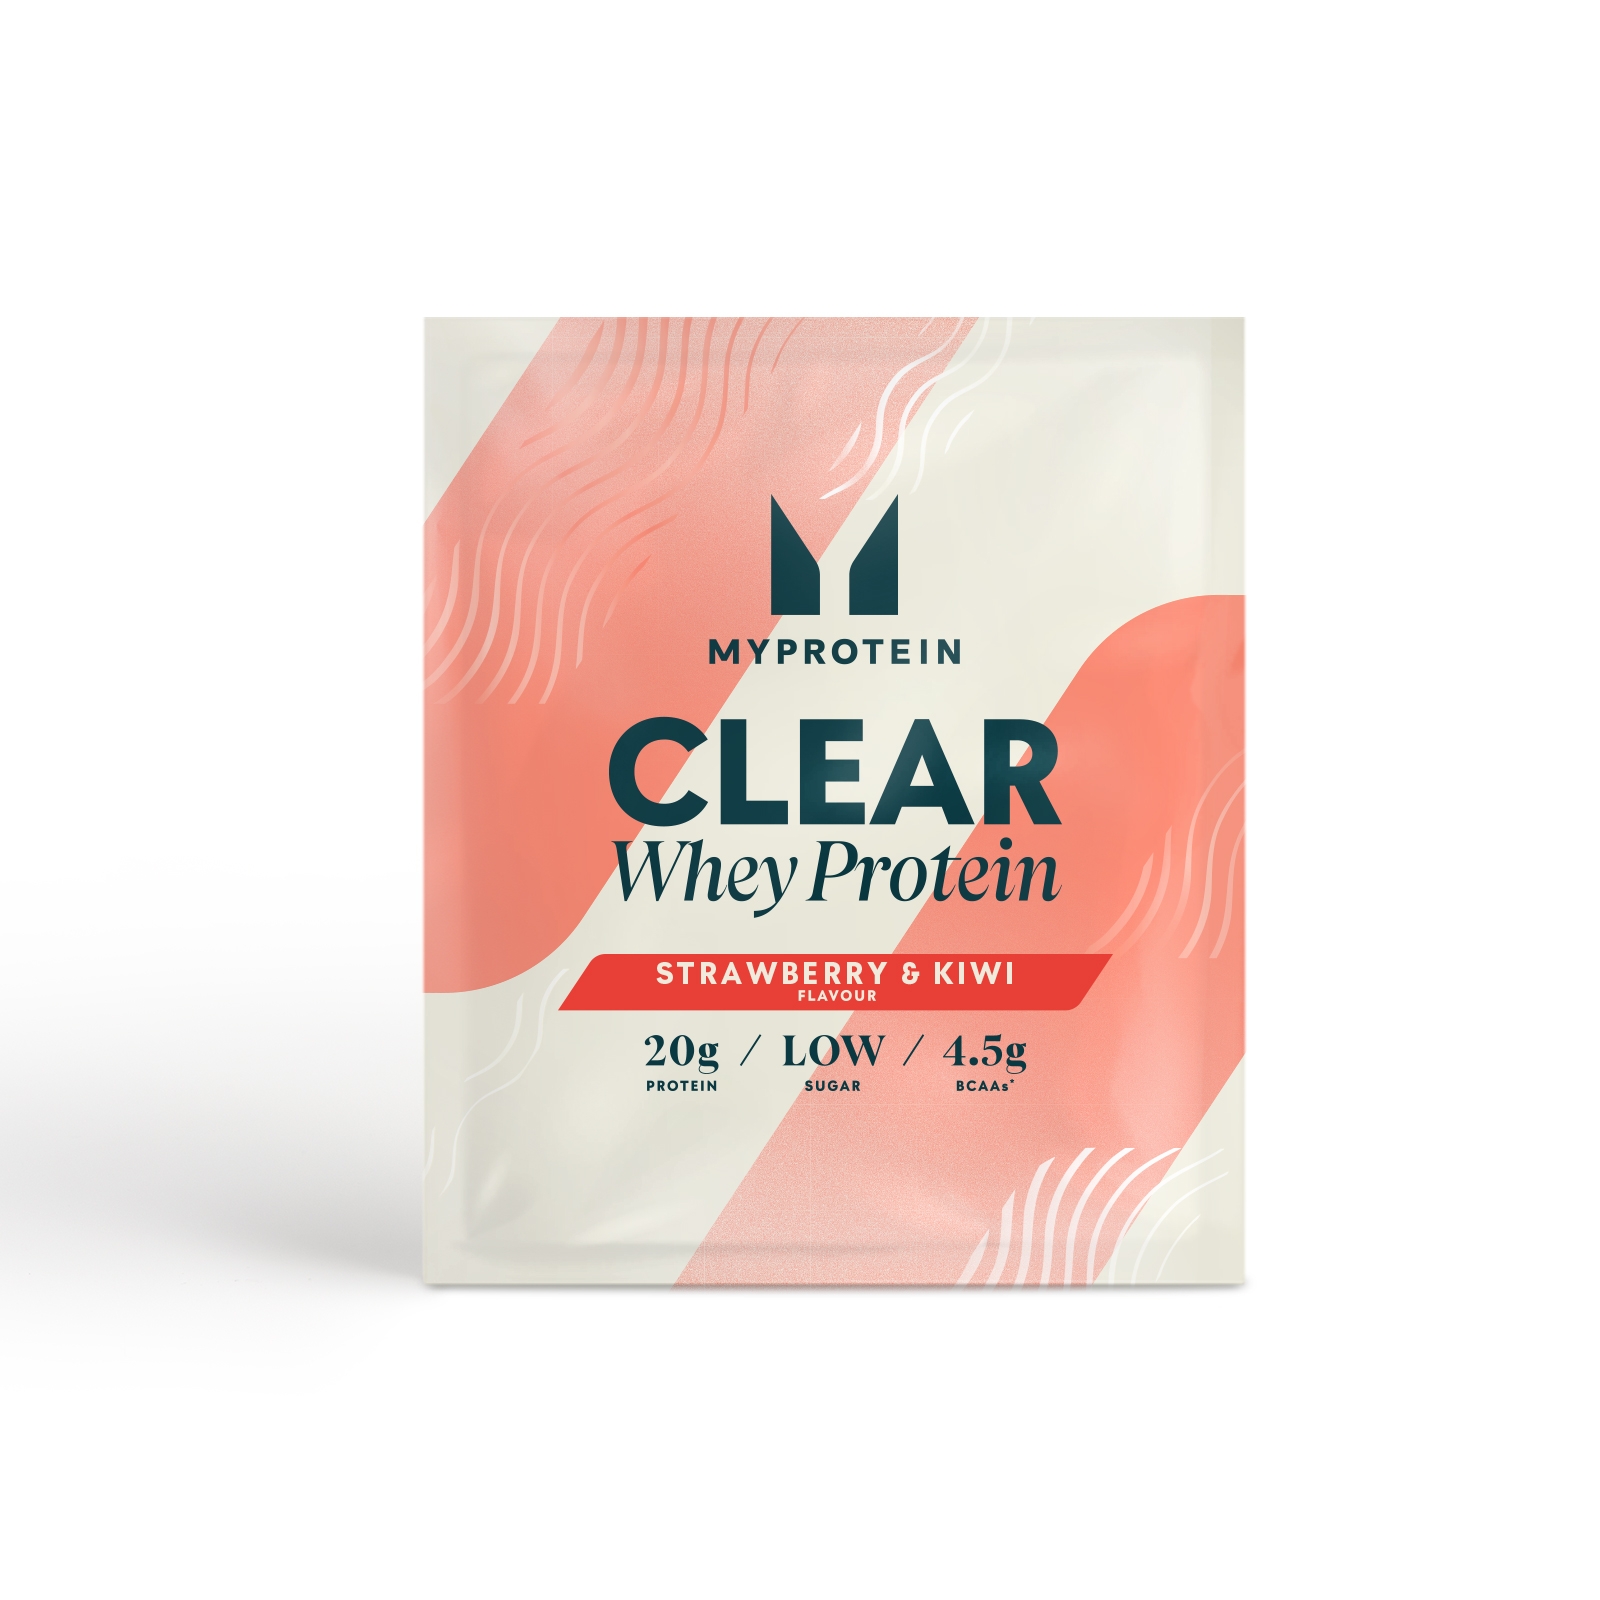 Clear Whey Protein (Sample) - 1servings - Strawberry Kiwi